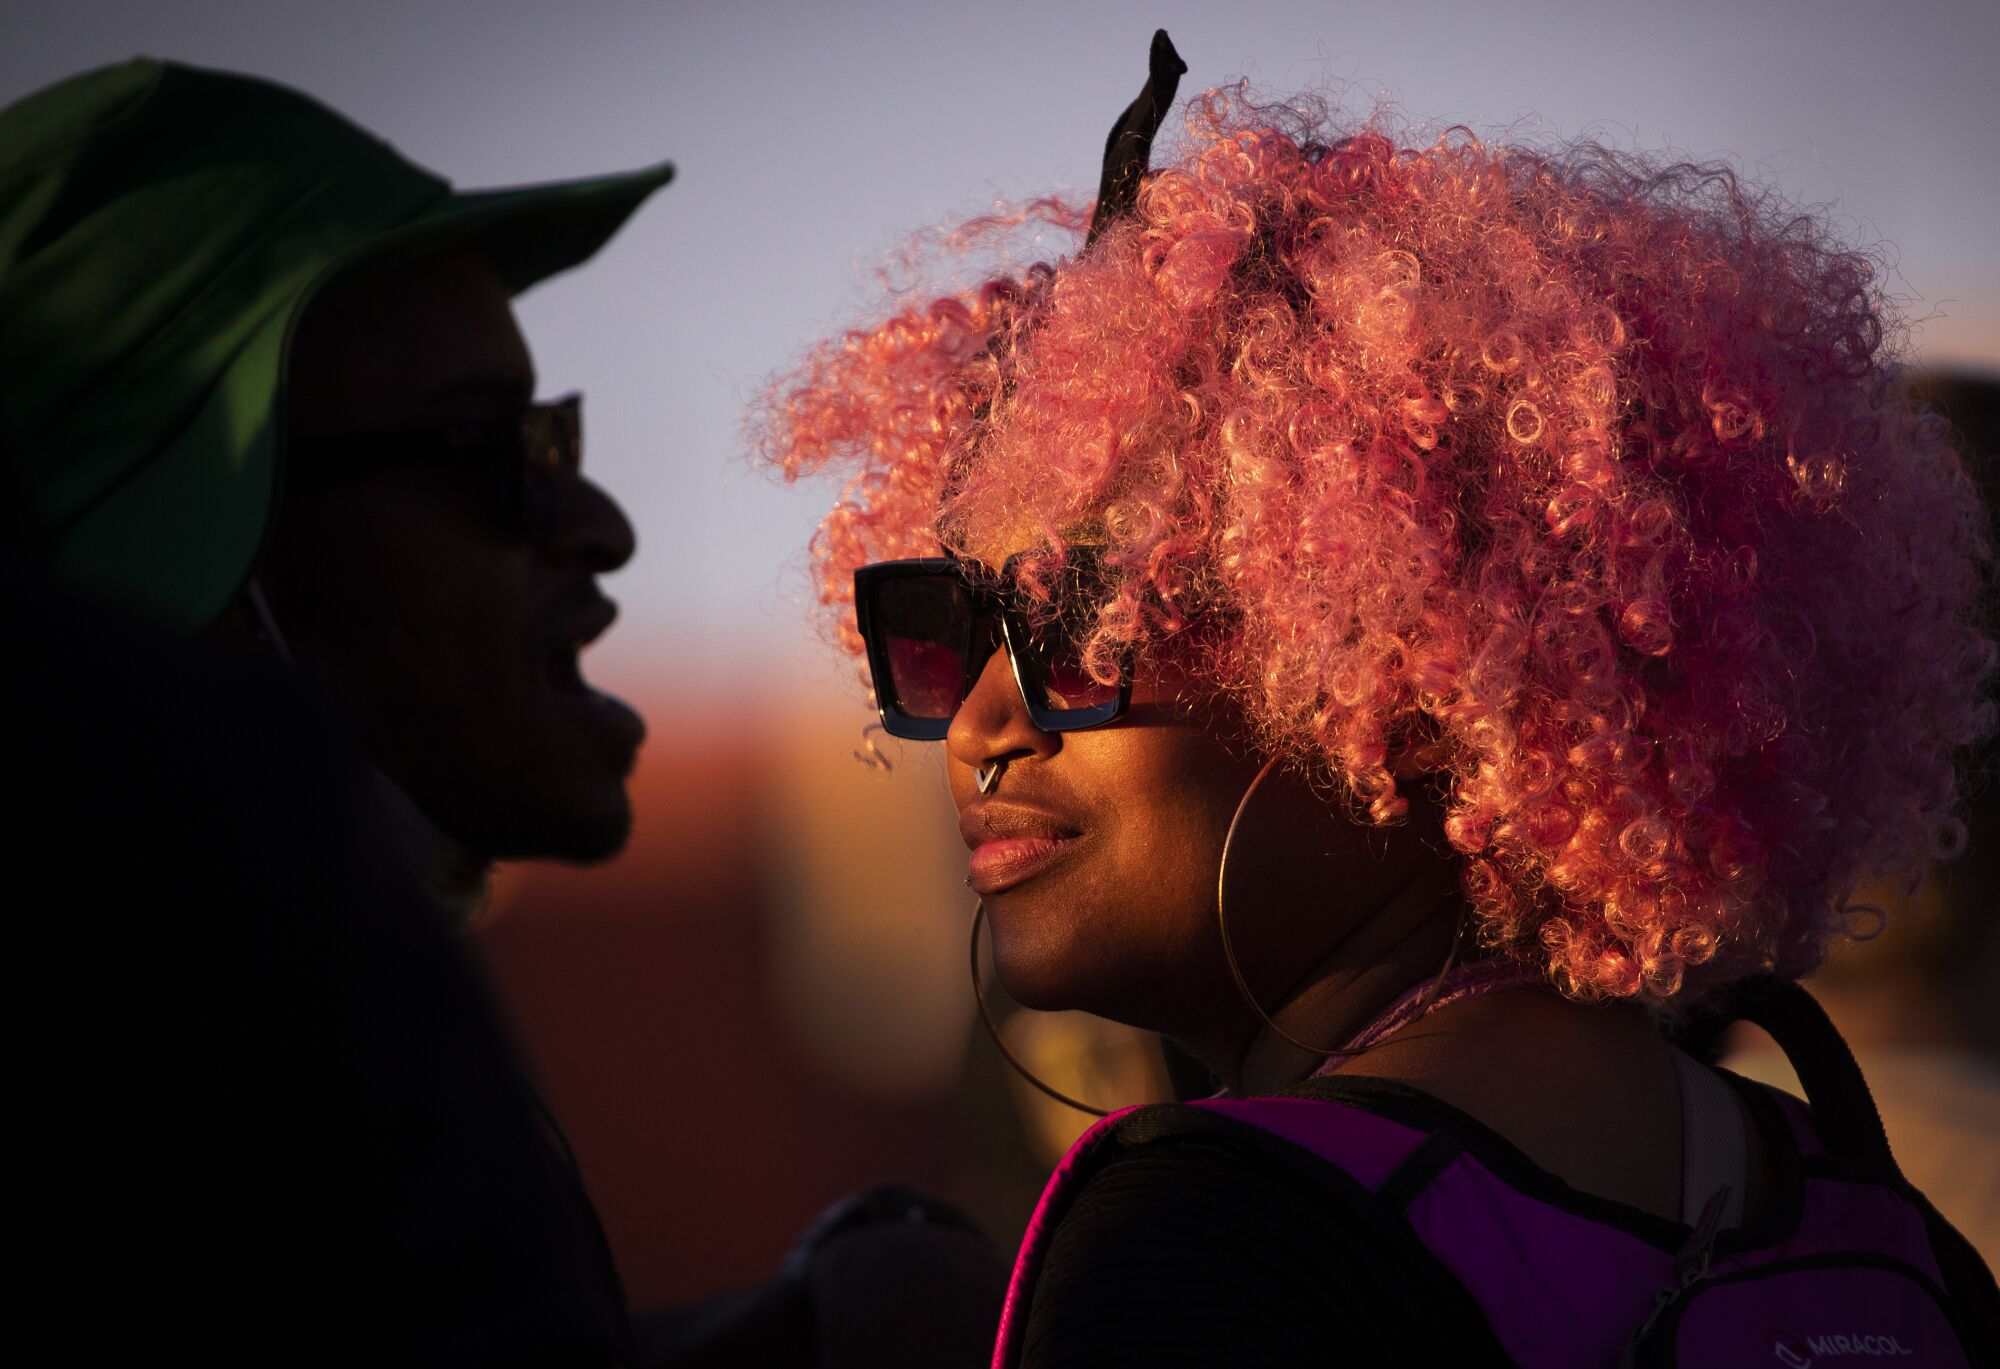 A woman with sunglasses, a pink afro and a septum piercing, right, and a silhouette of a man